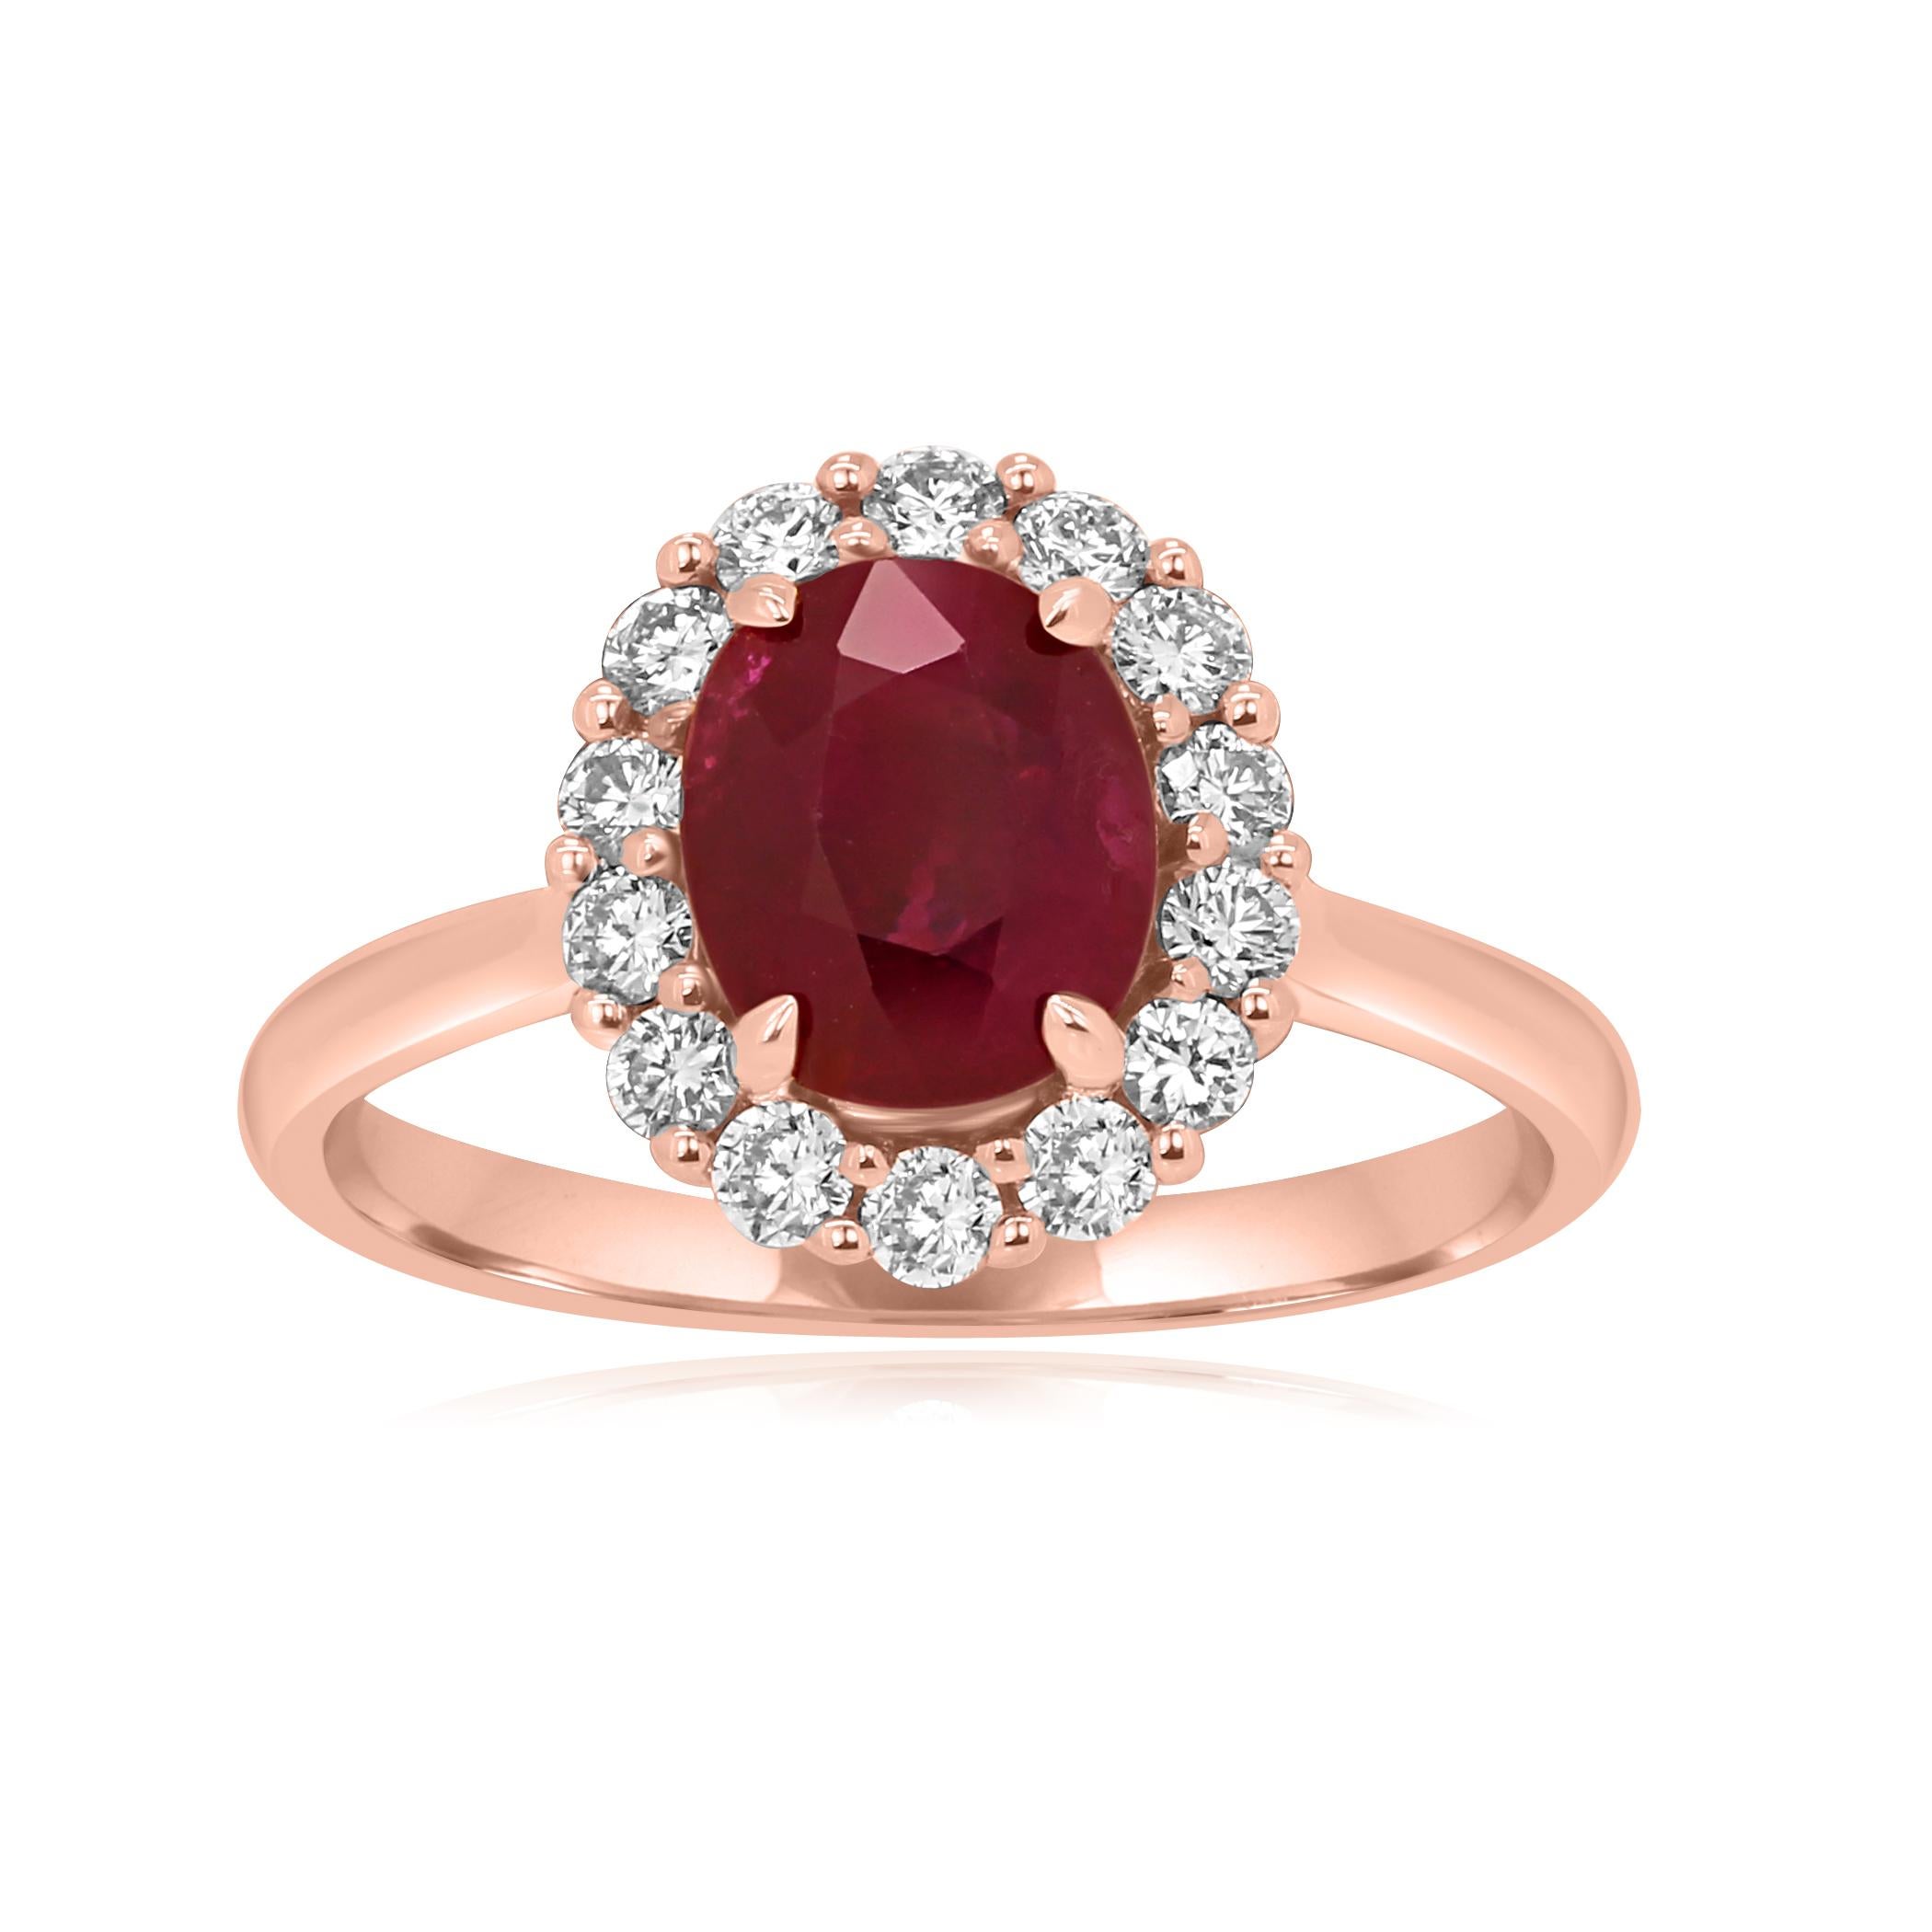 Ruby Oval approximately 2.00 Carat encircled in a Single Halo of White Round Diamond approximately 0.40 Carat in 14K Rose Gold Gorgeous classic Bridal fashion Jewelry.

Total Stone Weight approximately 2.40 Carat 

This is a made to to order ring.